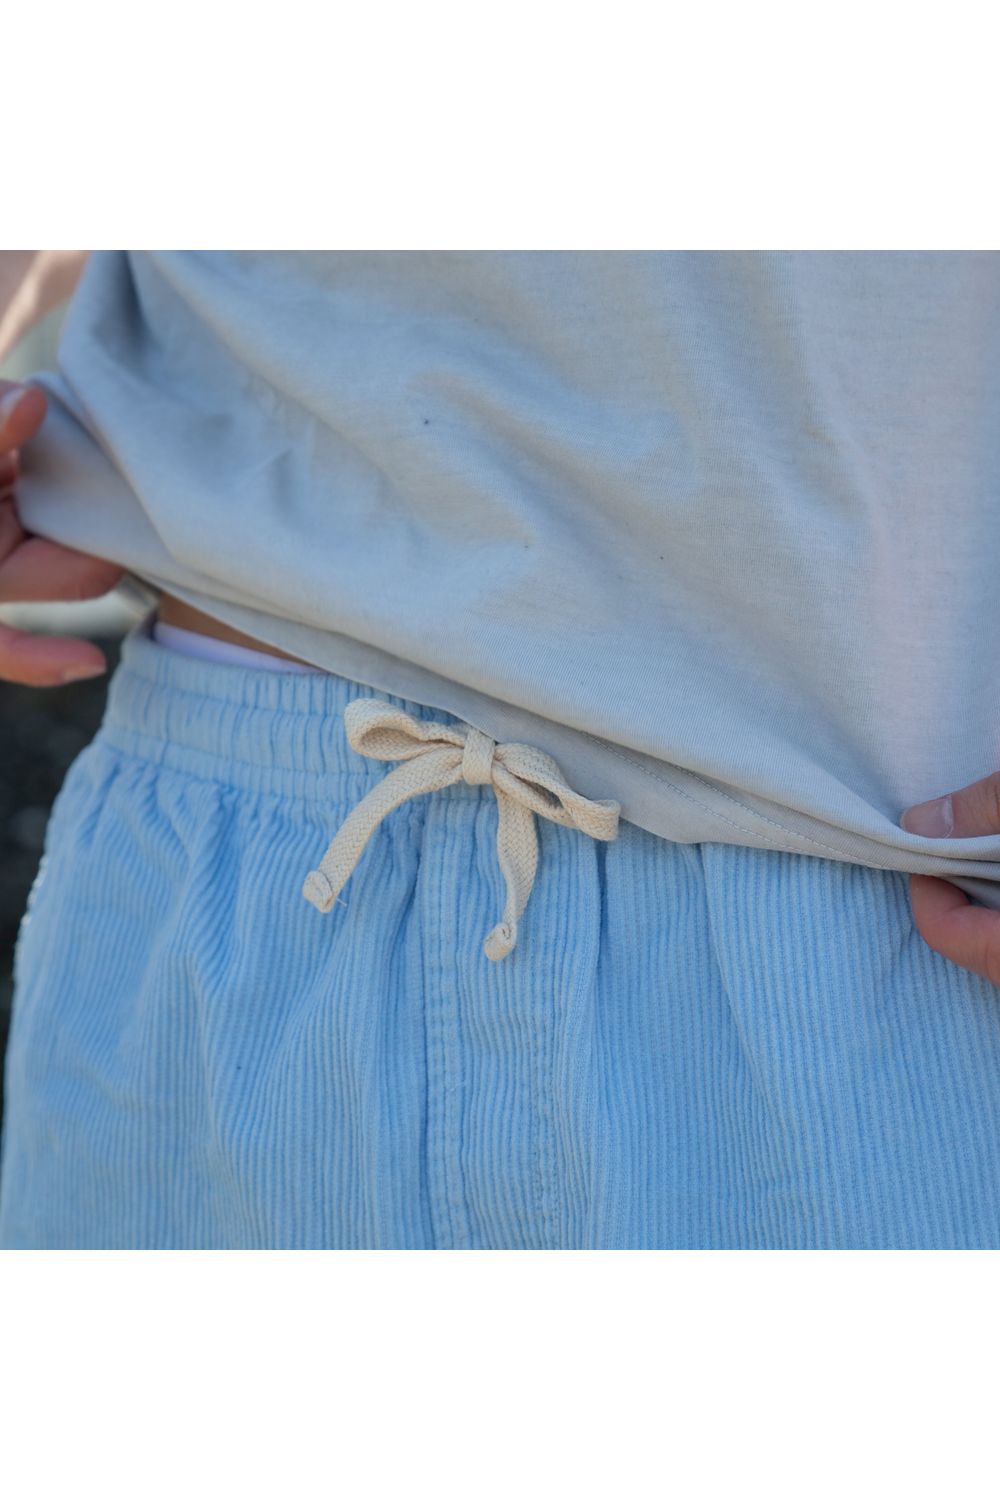 Bamboobay Cord Shorts in light blue front waist Tie